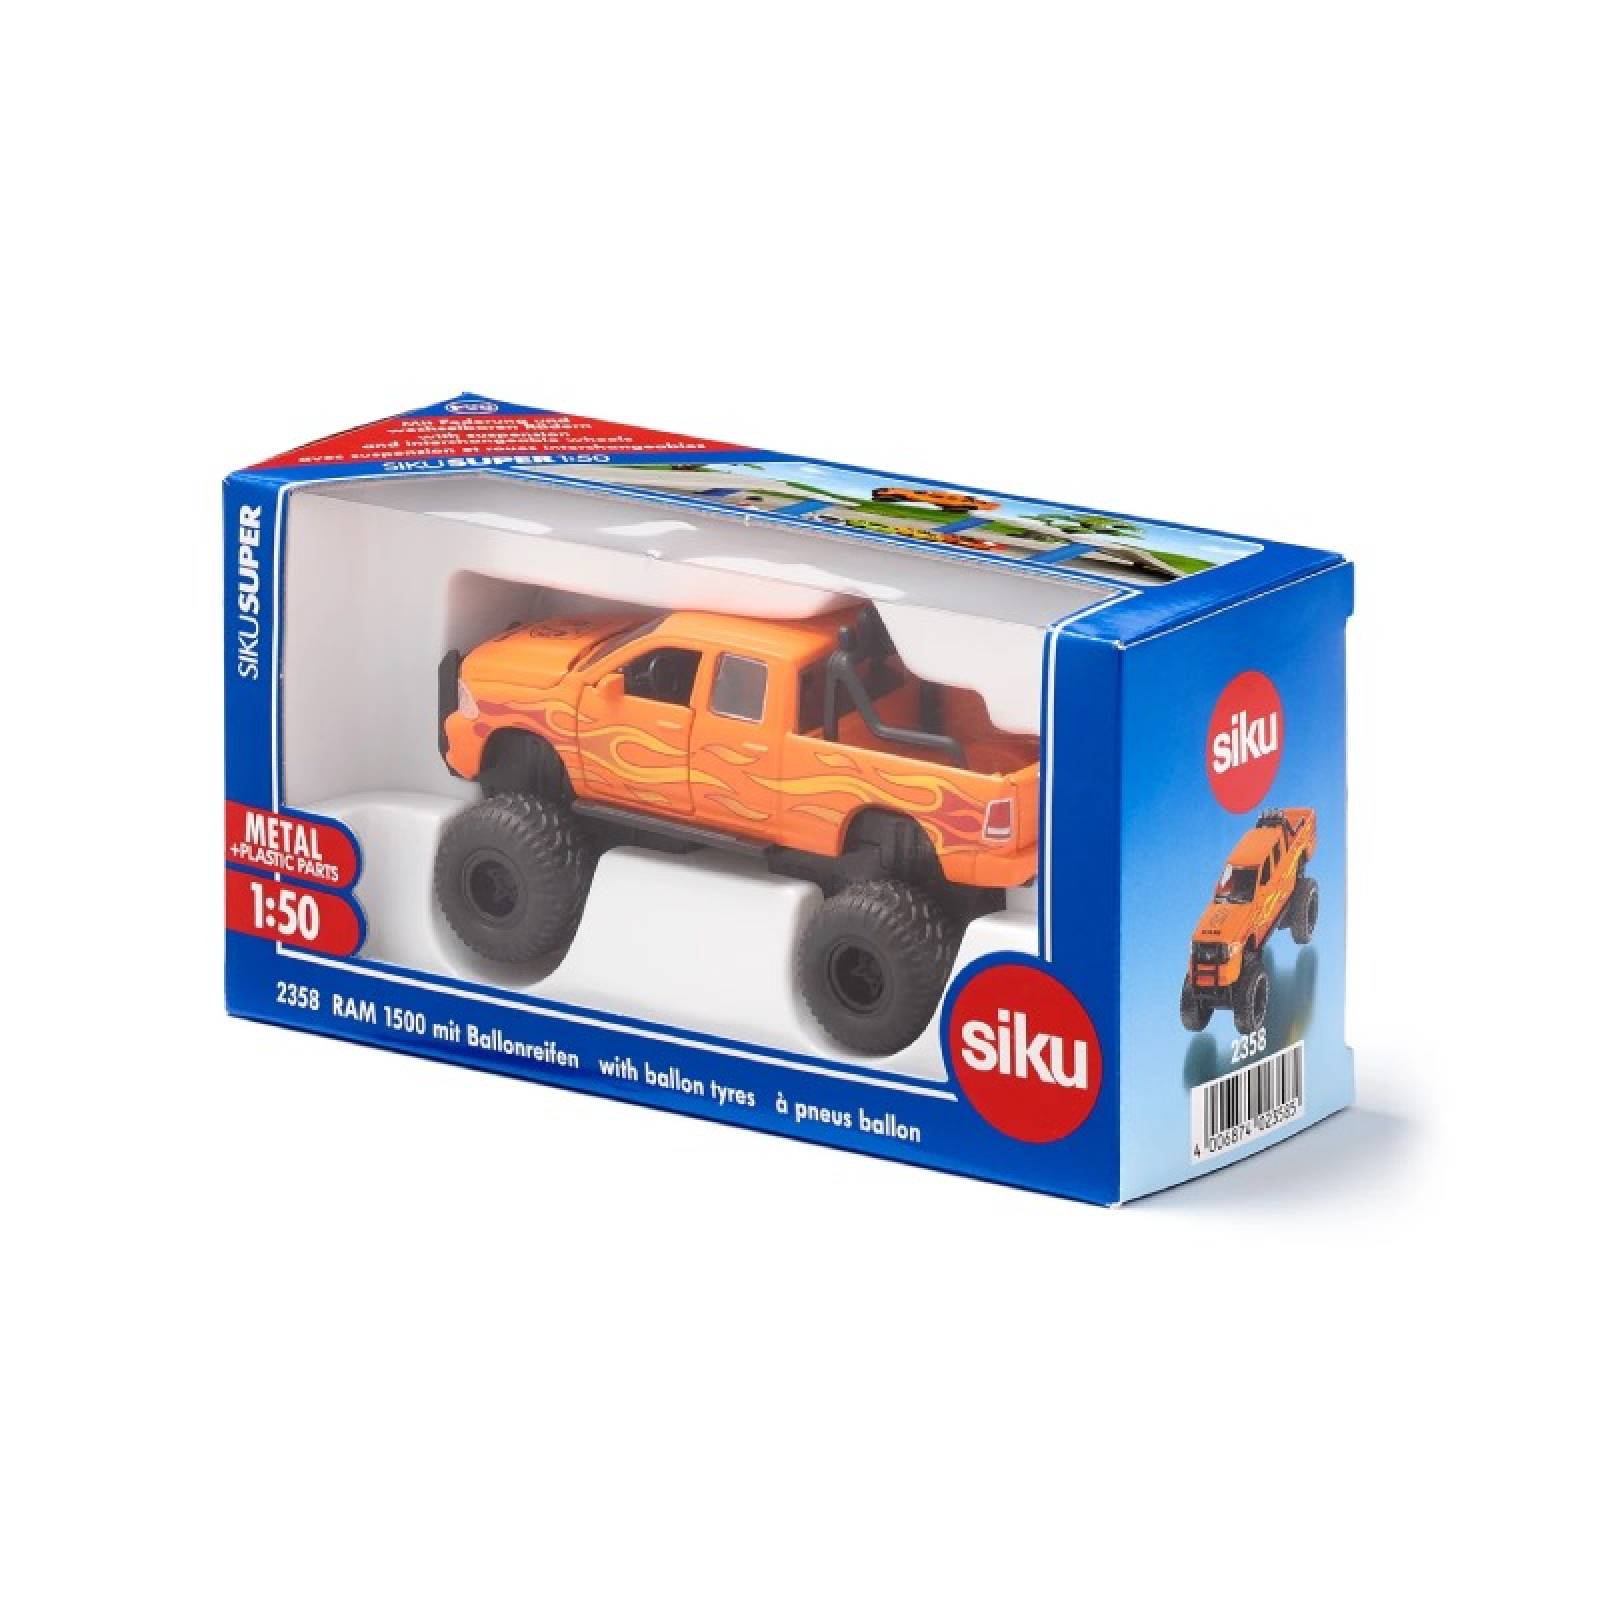 RAM1500 Truck With Balloon Tyres - Die-Cast Toy Vehicle 3+ thumbnails